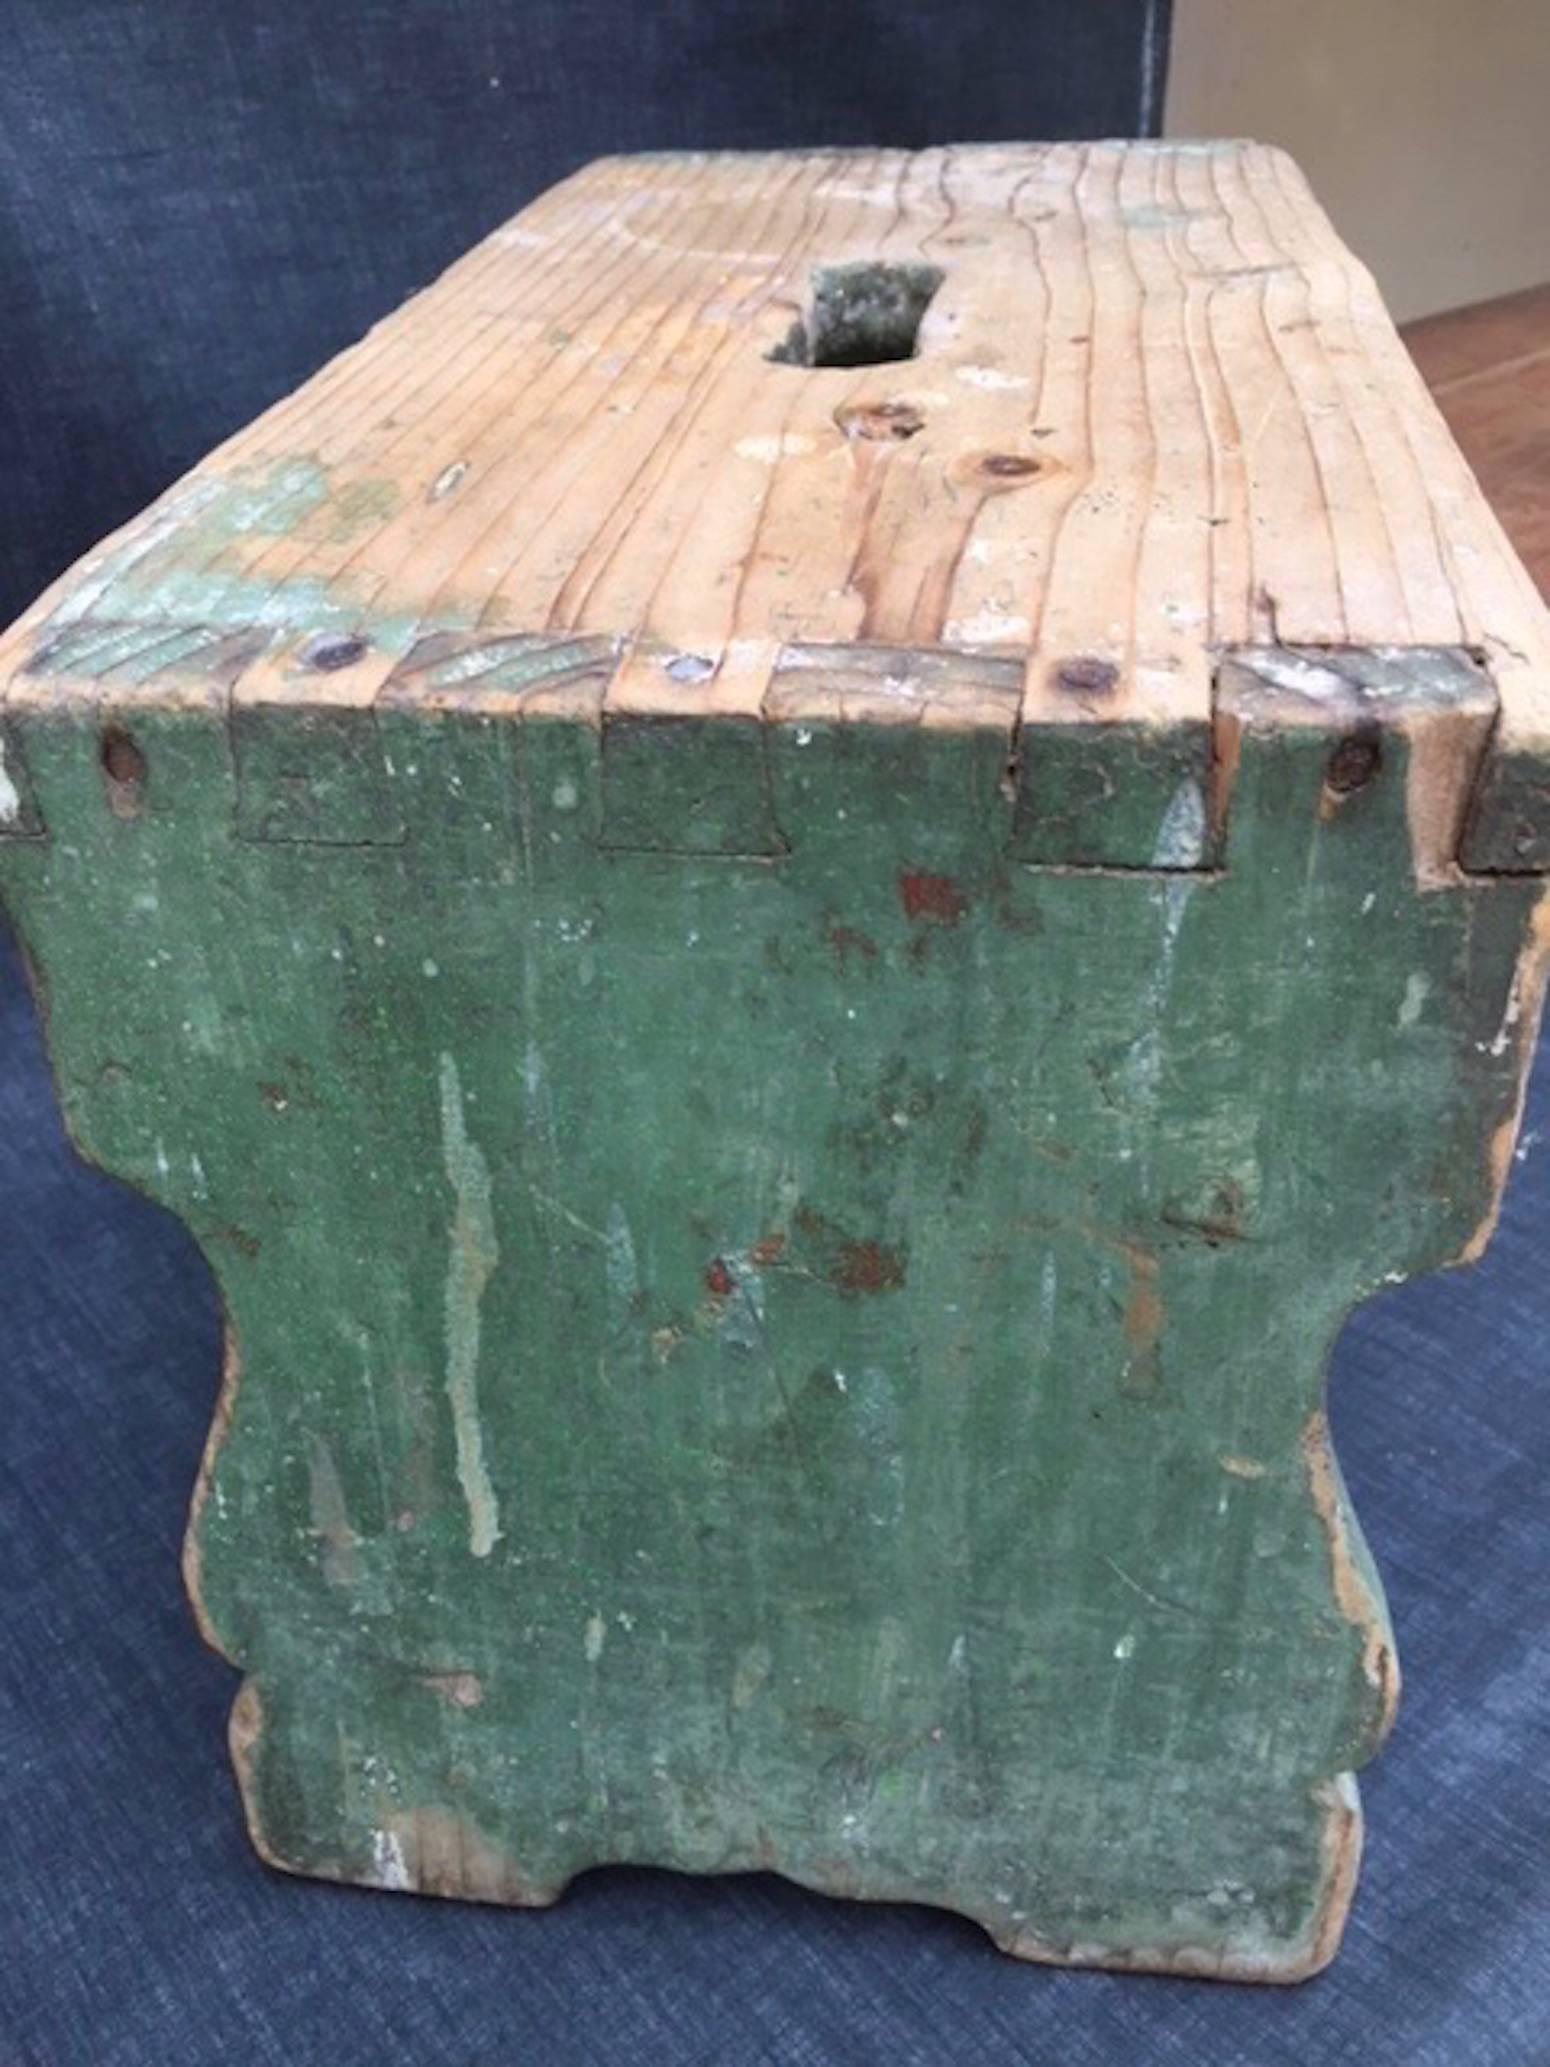 Hungarian farm stool used for milking cows, circa 1890. Solid pine retaining the original apple green paint with a lovely chalky patina gained from many years of use.
I love to use these stools as pedestals for plants and vases.